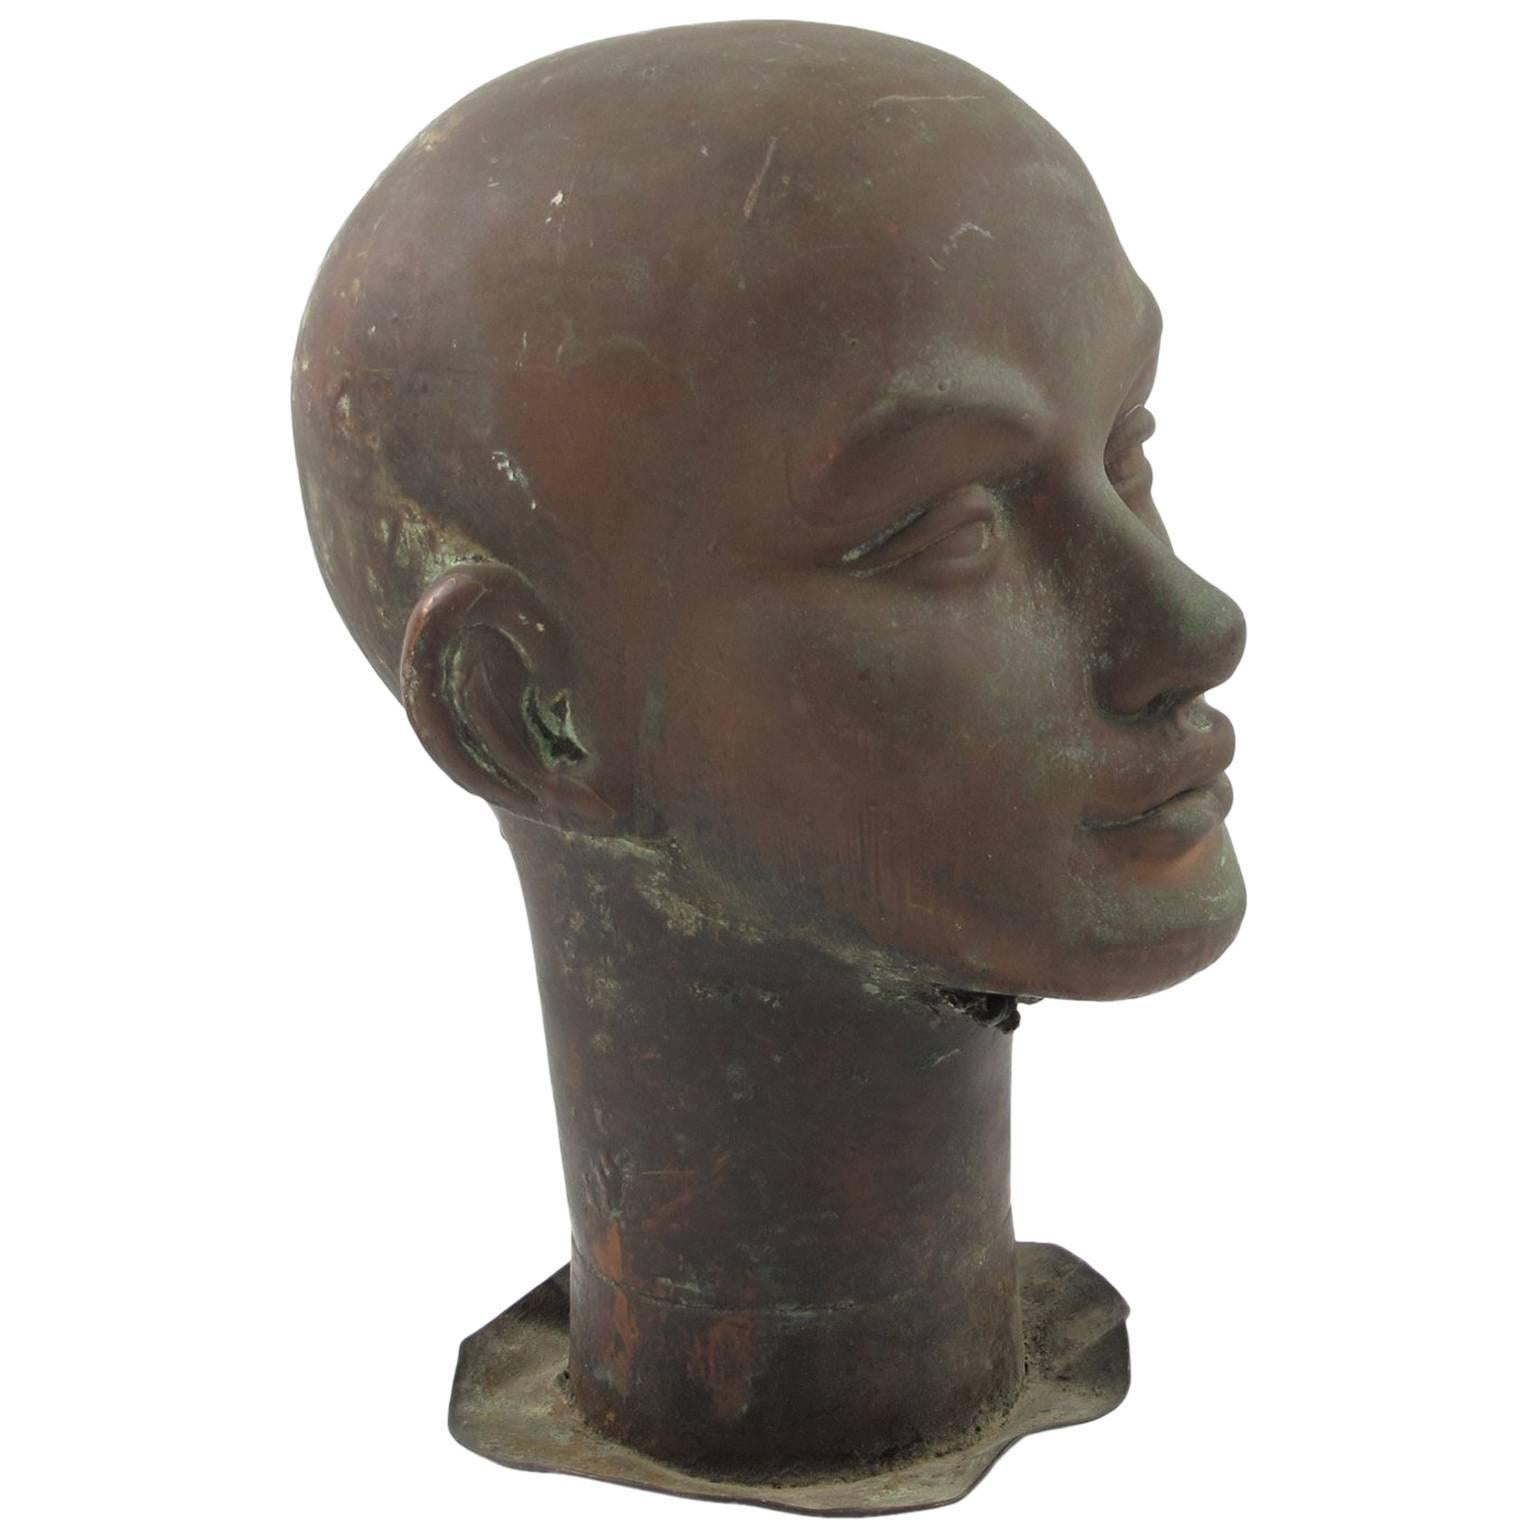 French Industrial Copper Doll or Model Head Factory Mold for Curiosity Cabinet